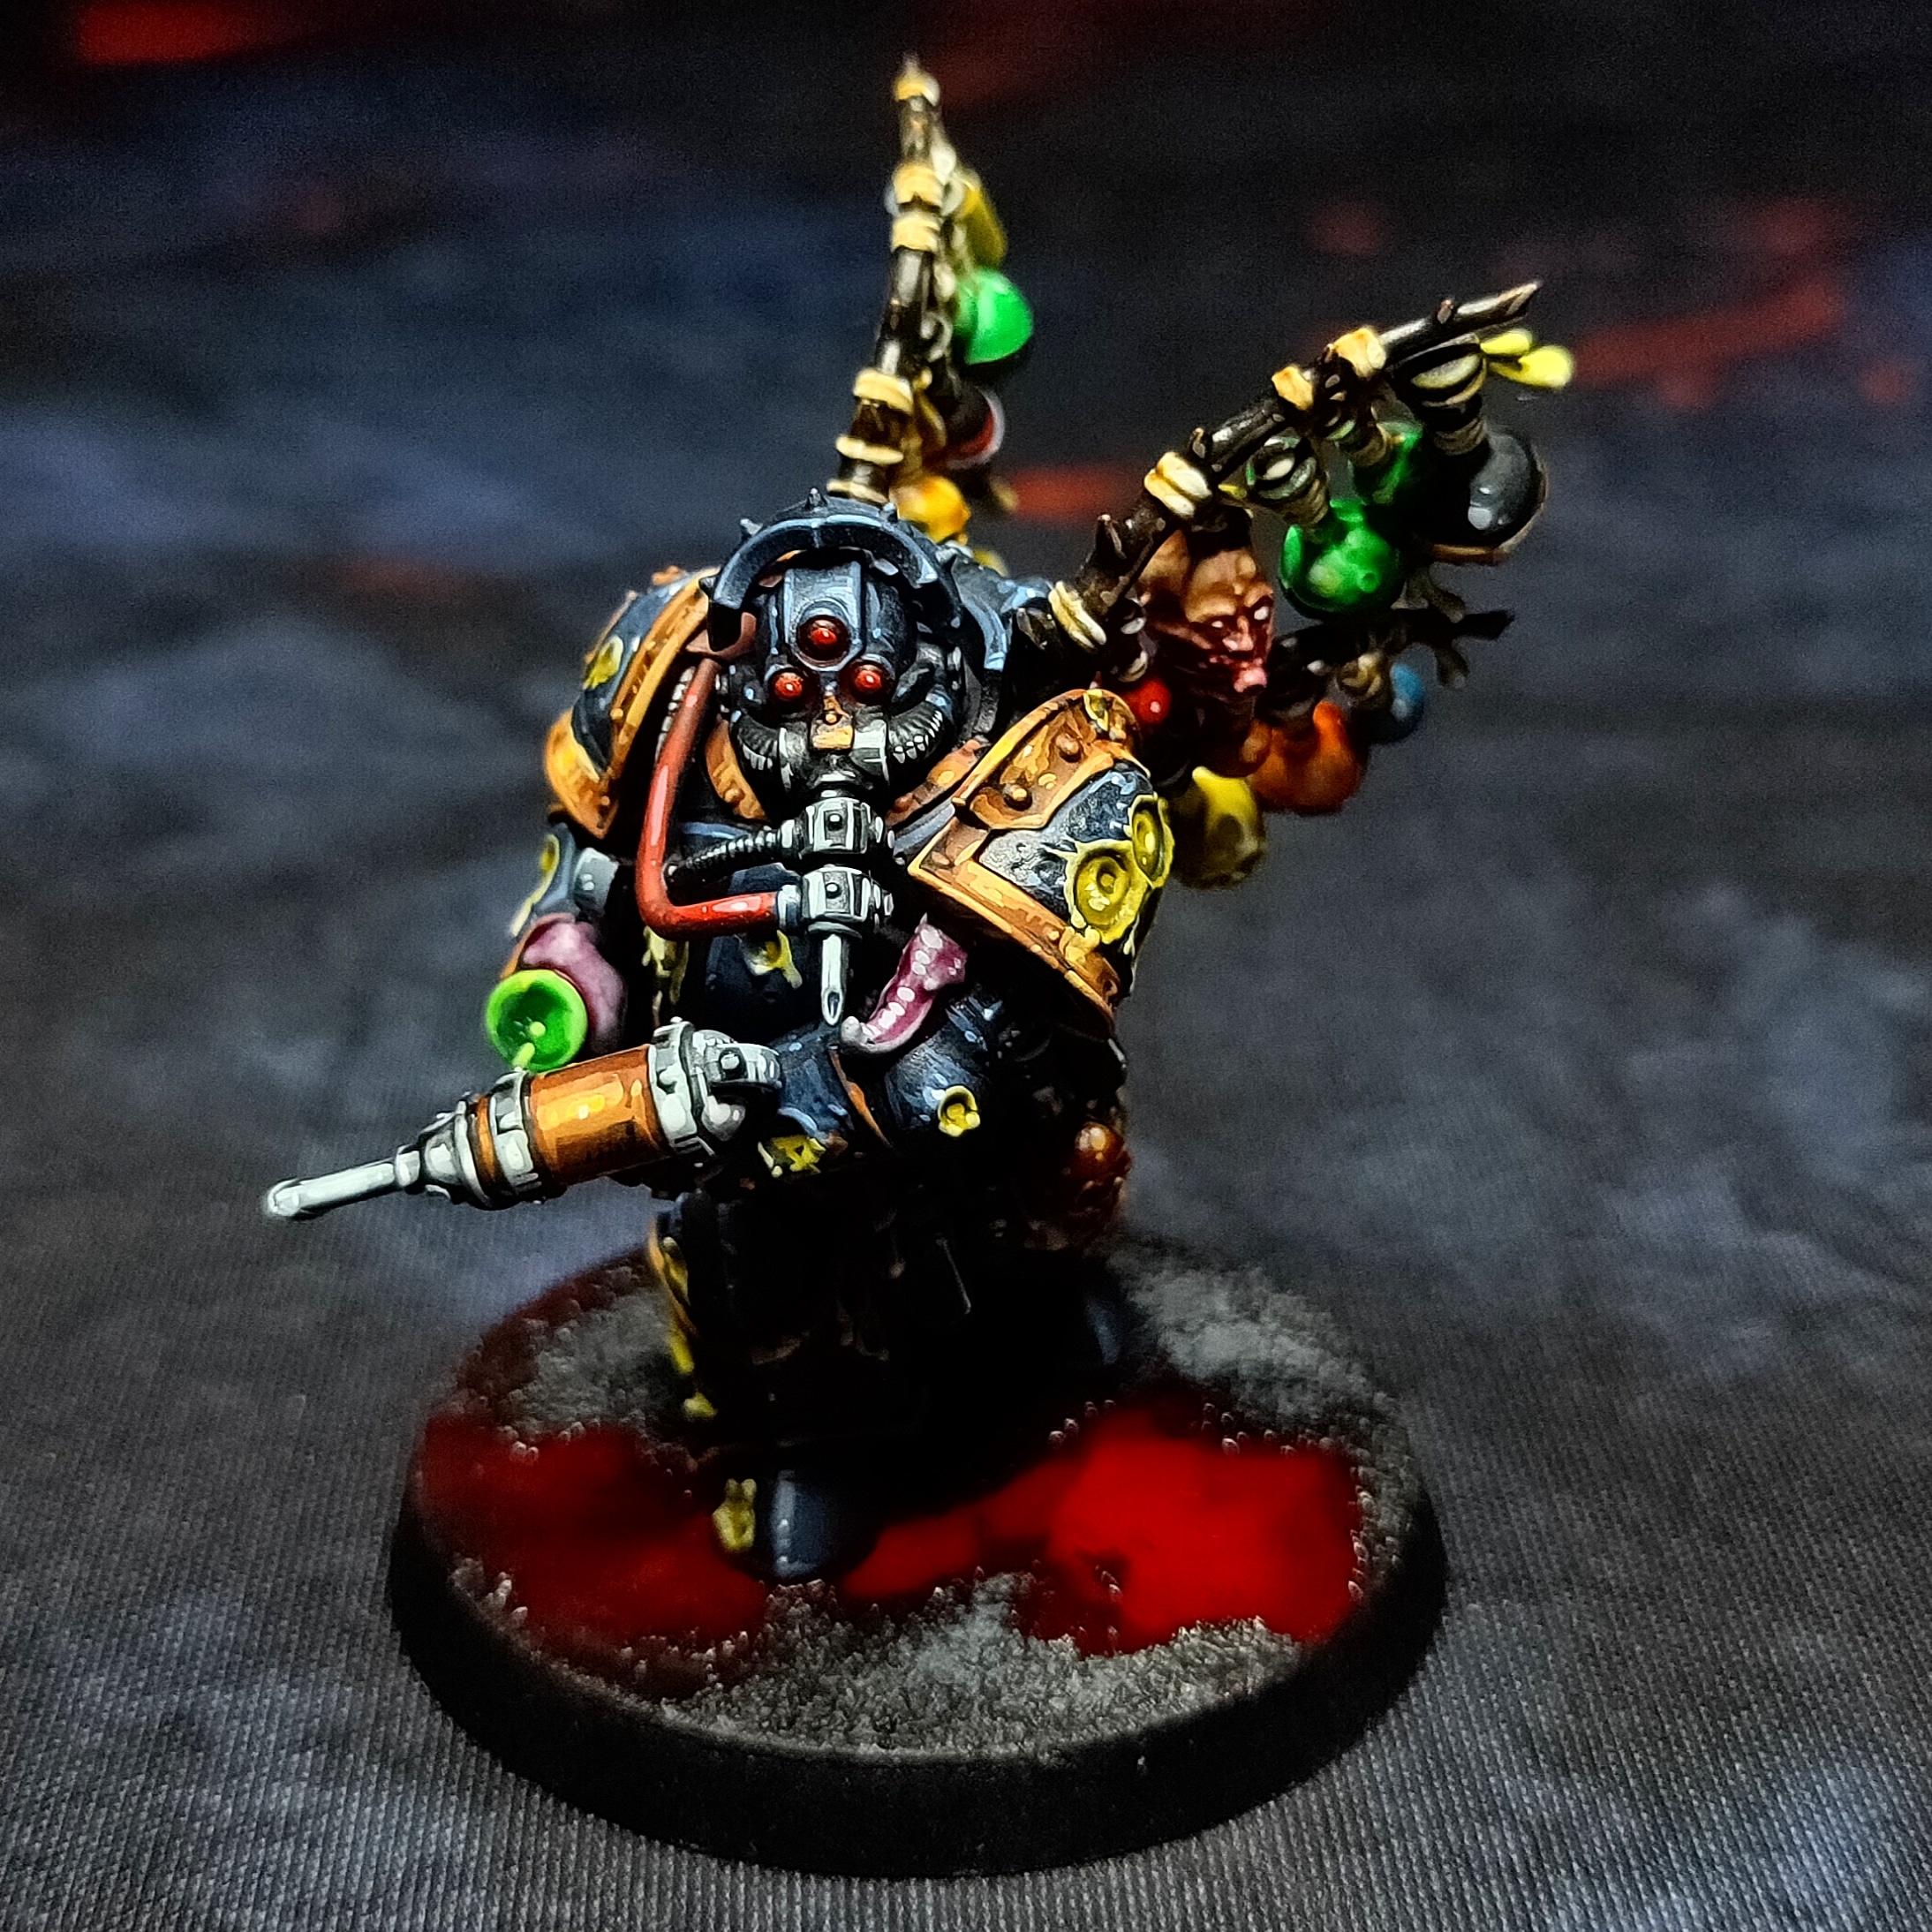 Biologus Putrifier, Black Legion, Bringers Of Decay, Chaos, Chaos Knight, Chaos Space Marines, Chaos Undivided, Death Guard, Heretic Astartes, Plague Marines, Sin Eaters, Warhammer 40,000